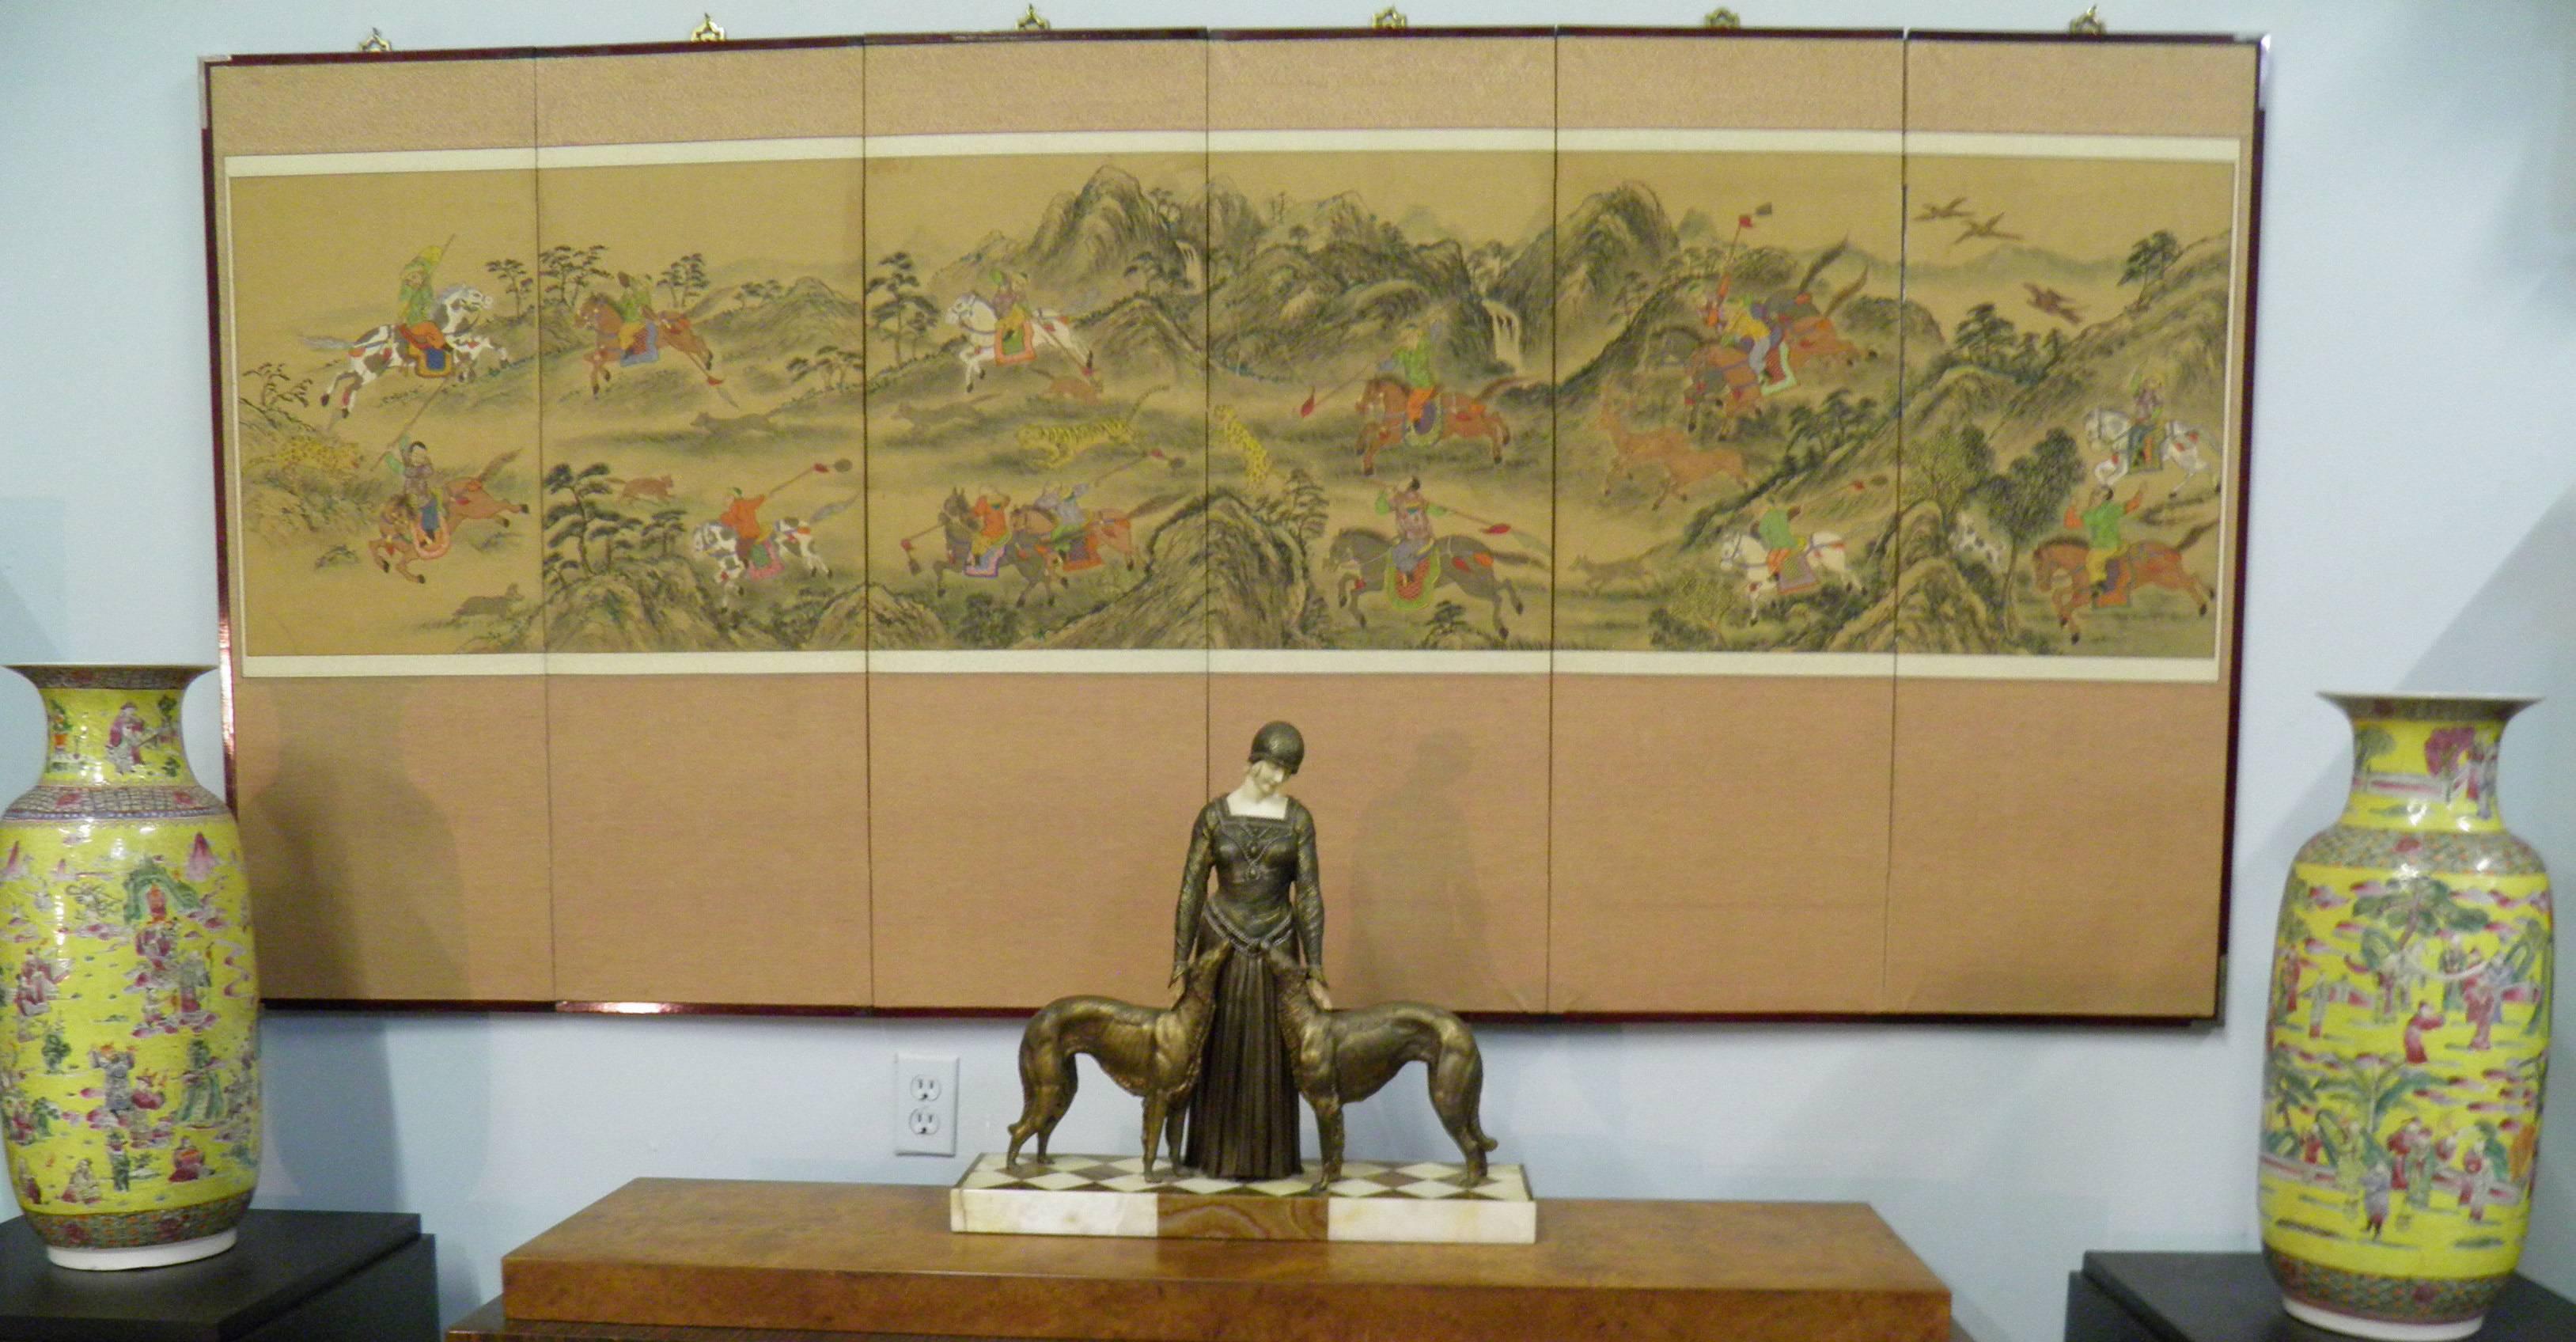 Exquisite Korean early 1900s 6 Fold Screen- Ink and Color on Paper with Venerable exciting Mongol Tiger Hunt Scene.
Dynamic scenery with Mongol Horsemen with a variety of weapons drawn in a hilly landscape hunting tigers, wild boar, deer, birds, and